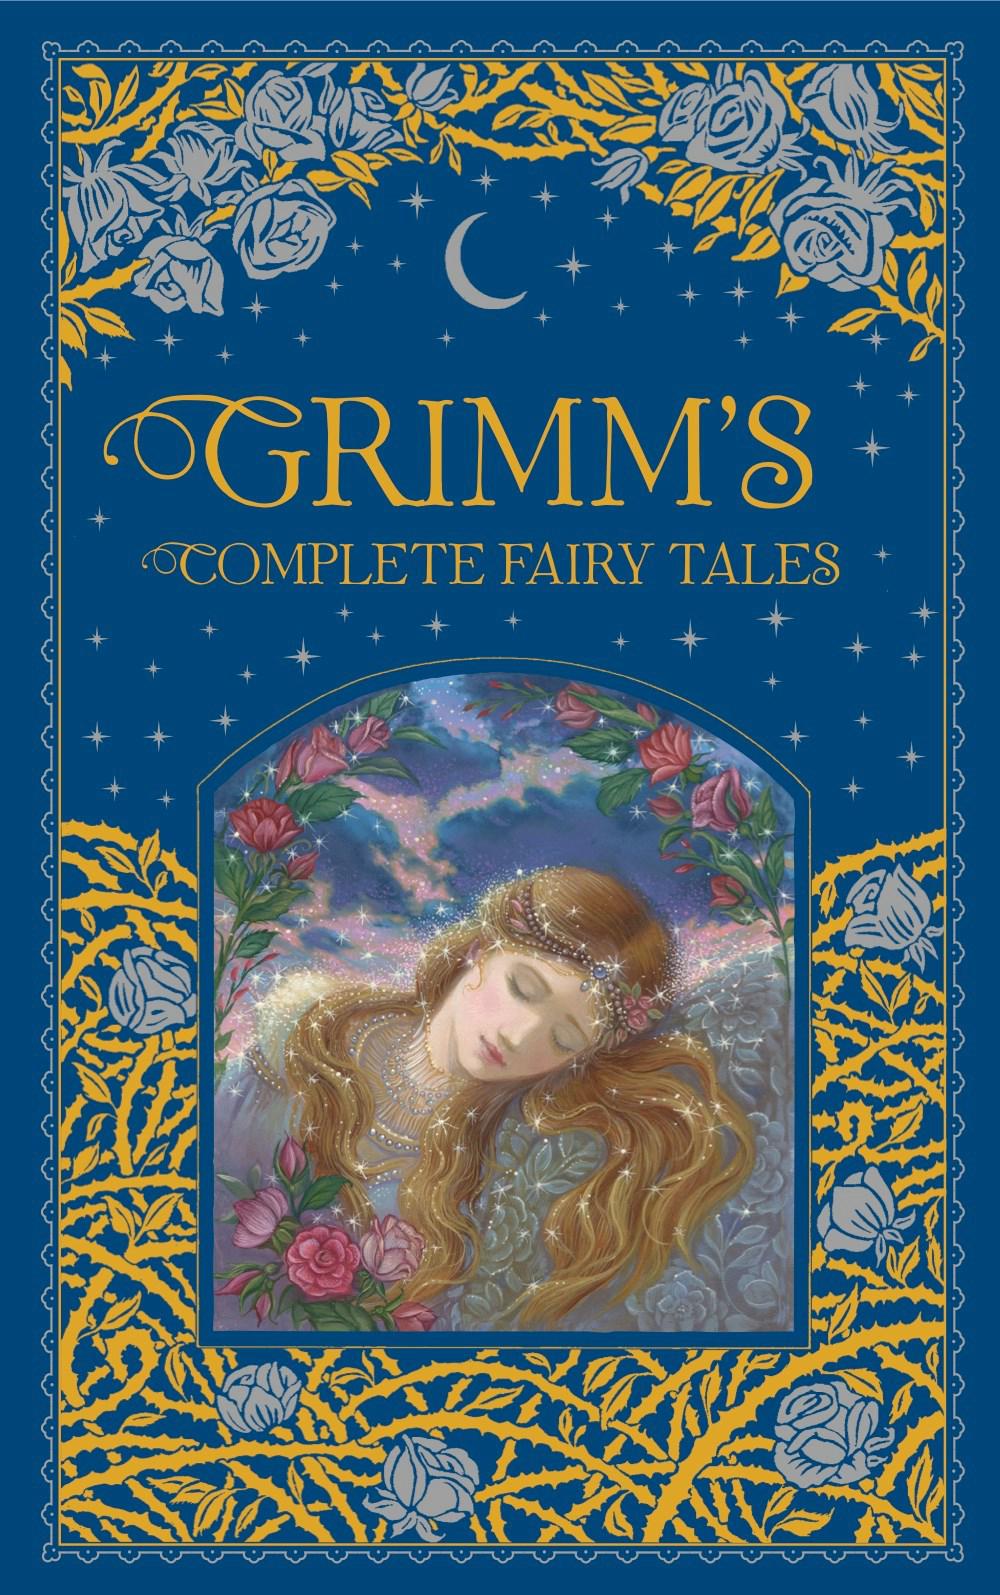 Grimm's Complete Fairy Tales (Barnes & Noble Collectible Editions) by ...